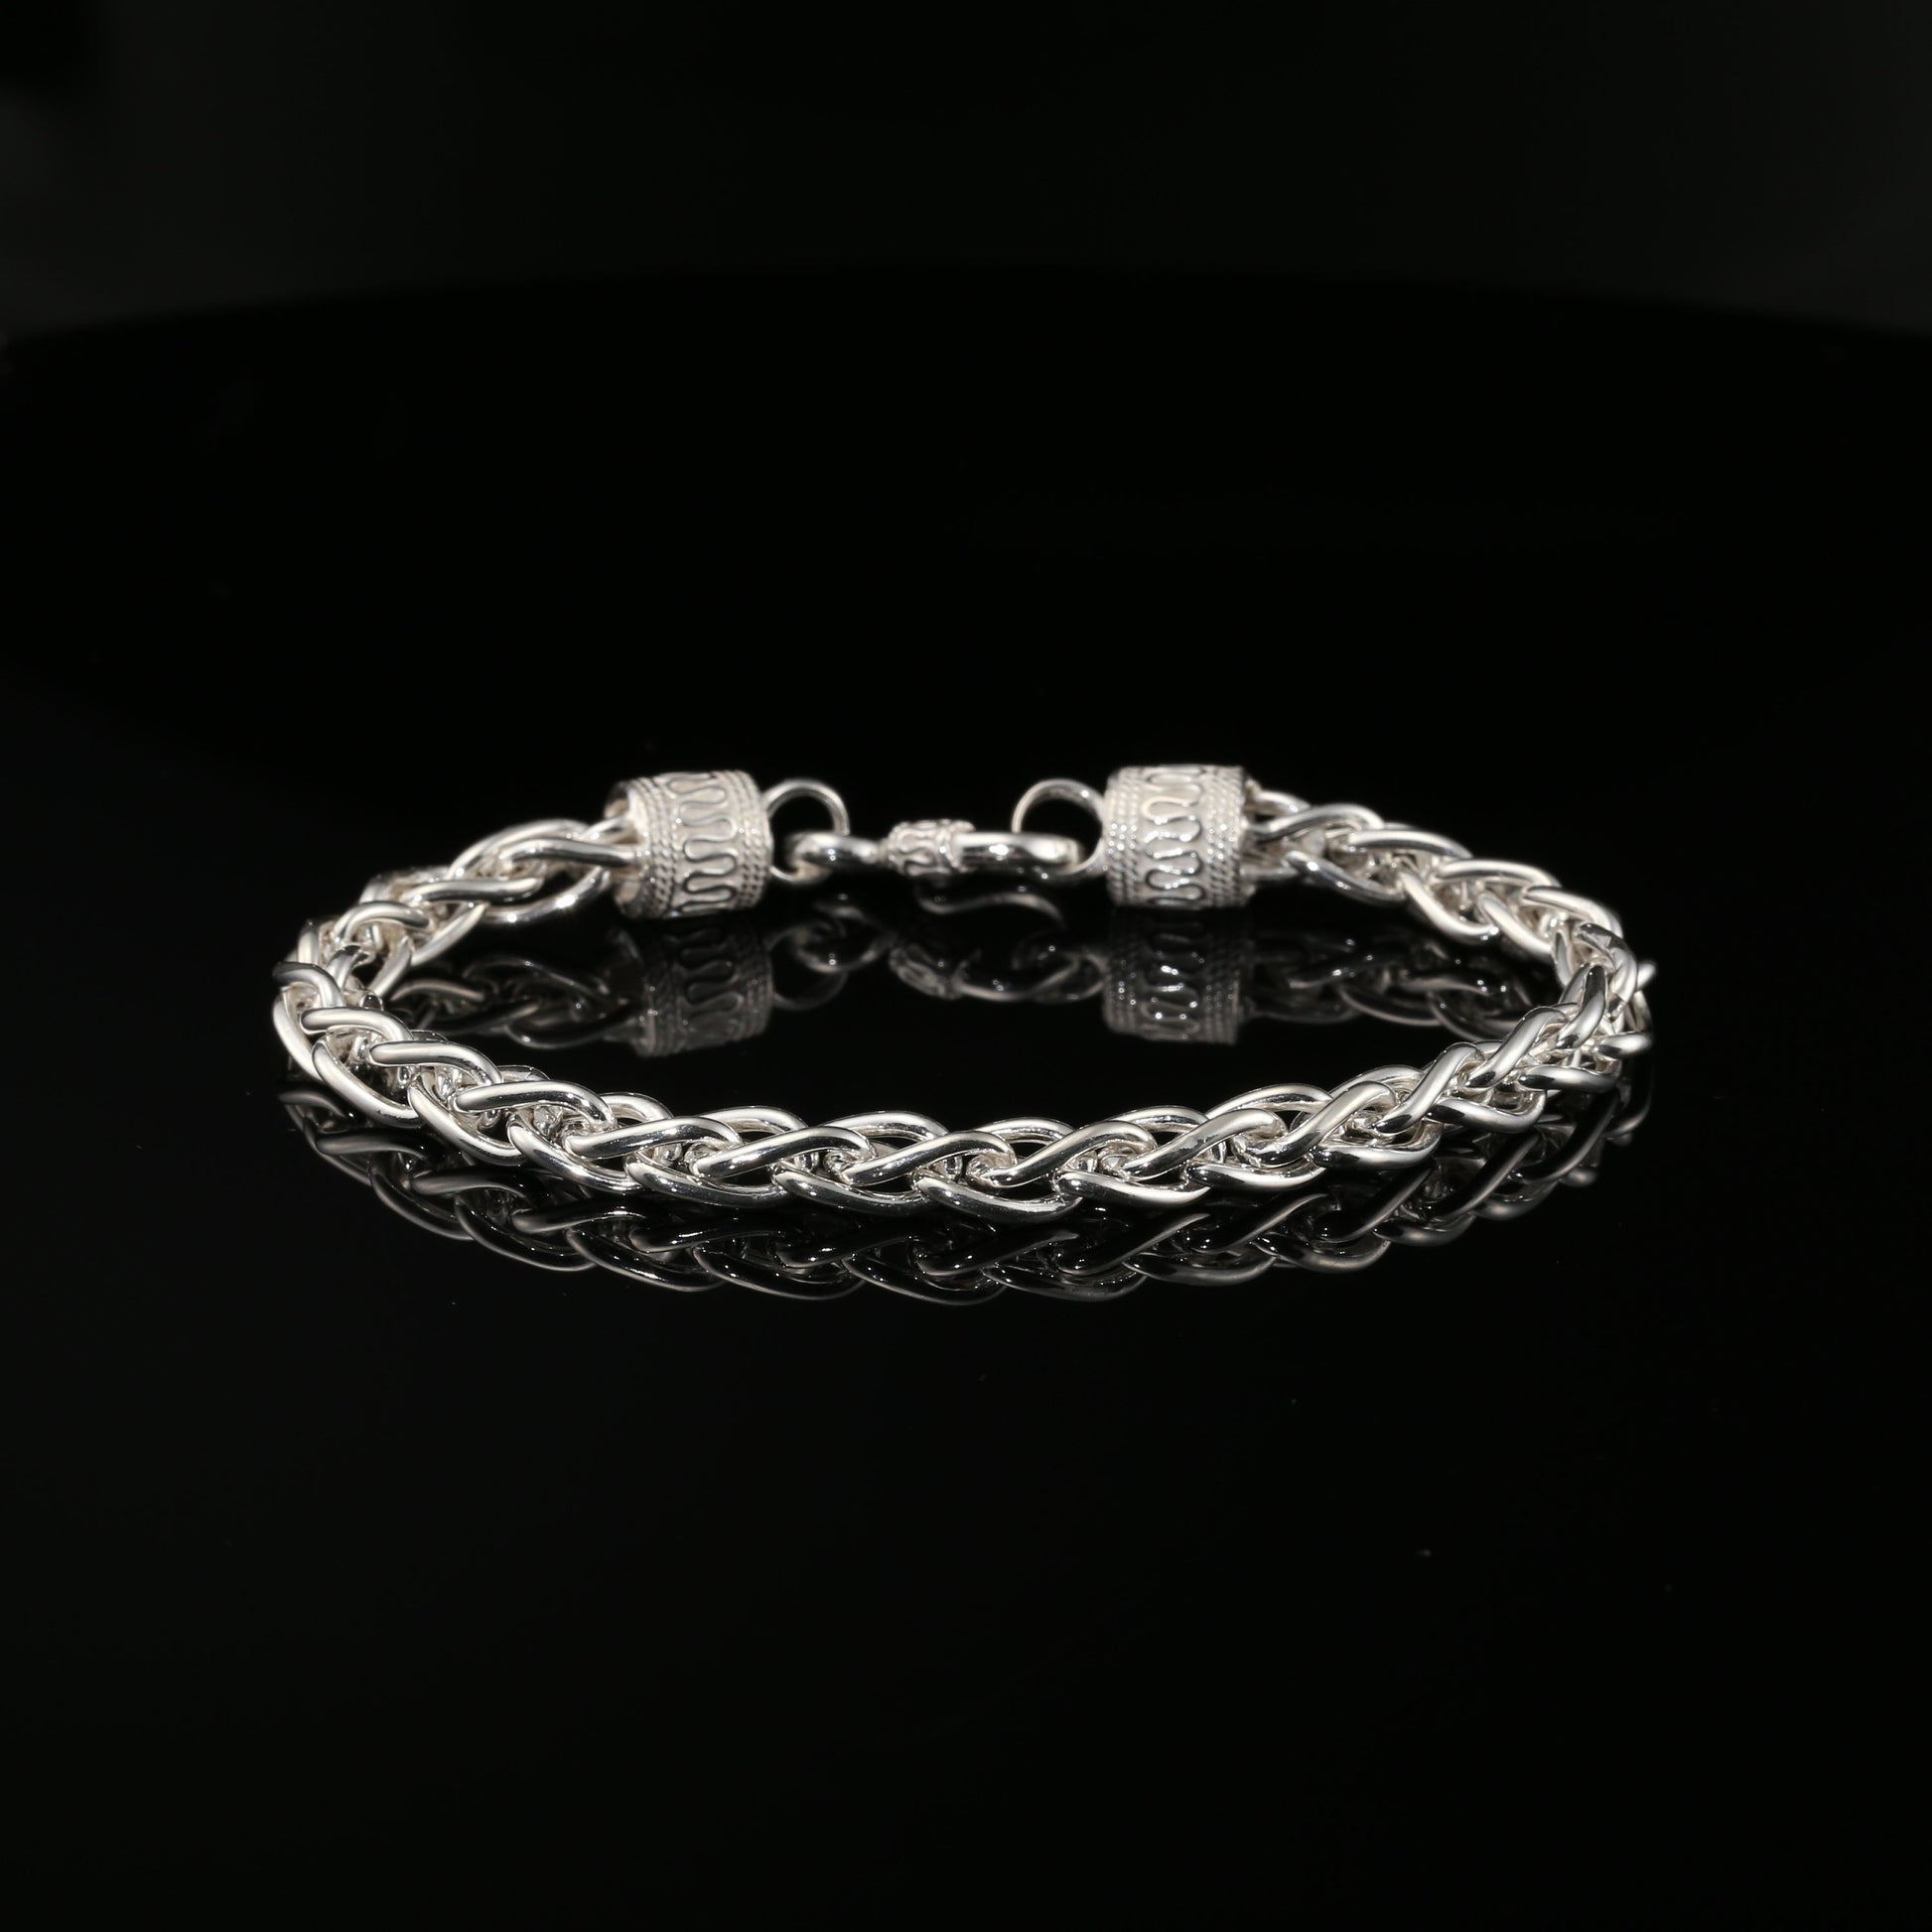 Handmade Byzantine Chain Bracelet with Hook Clasp, 8, unisex in Sterling Silver